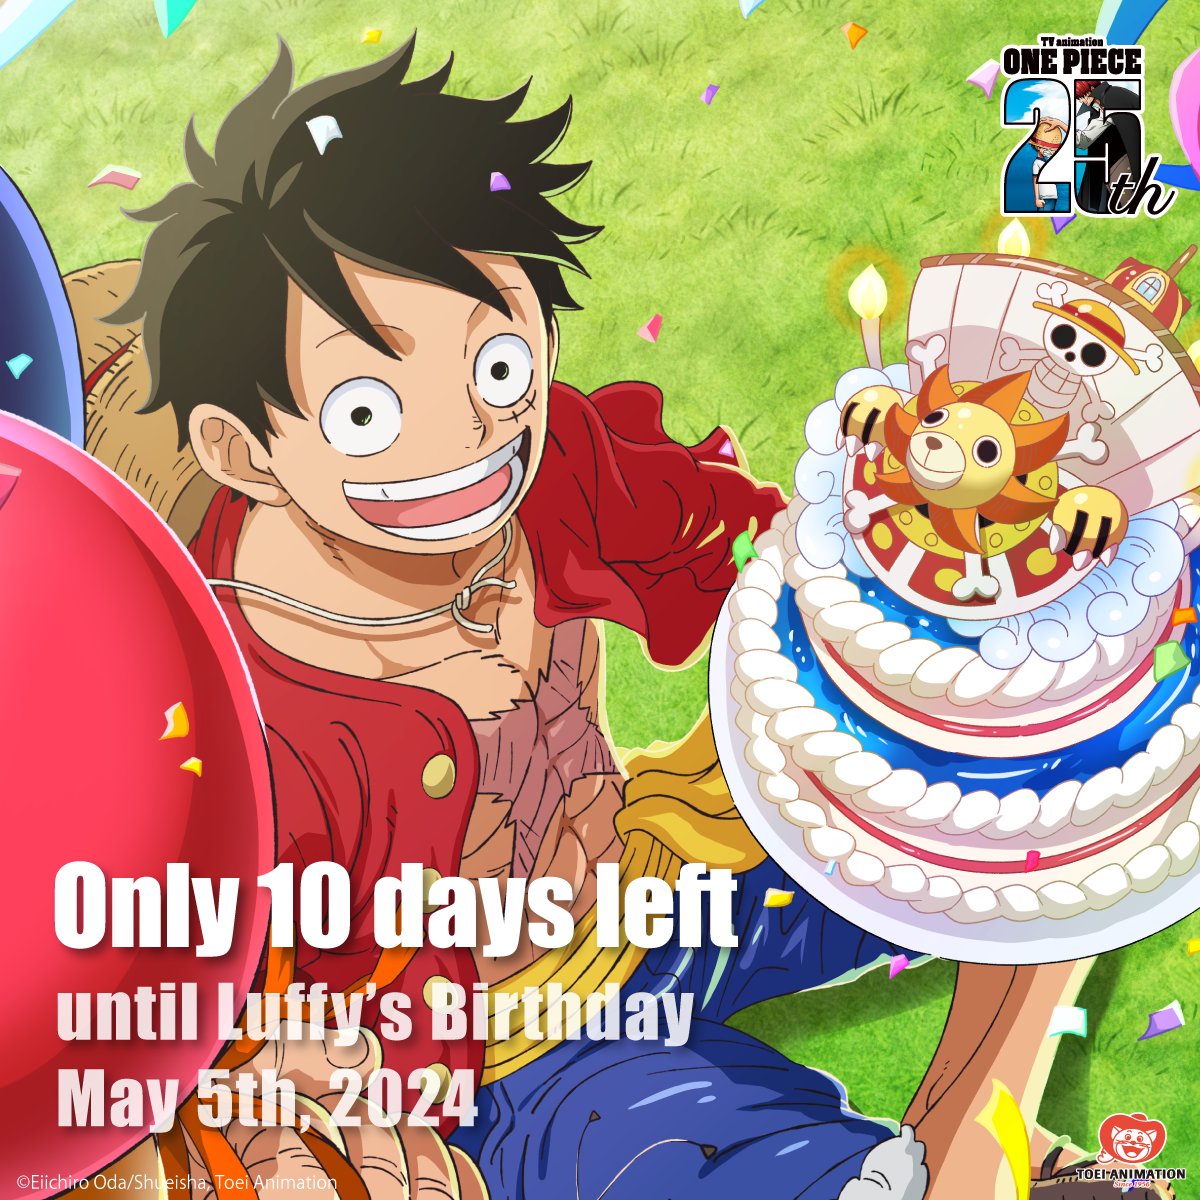 So now you know where to go for Luffy's birthday this year*😎  

Now let us give you more details!
In 5 countries you will find 5 gigantic inflatables of One Piece! 
These inflatables represent highlights of Luffy’s best moment to celebrate his birthday. 
Come and grab a little